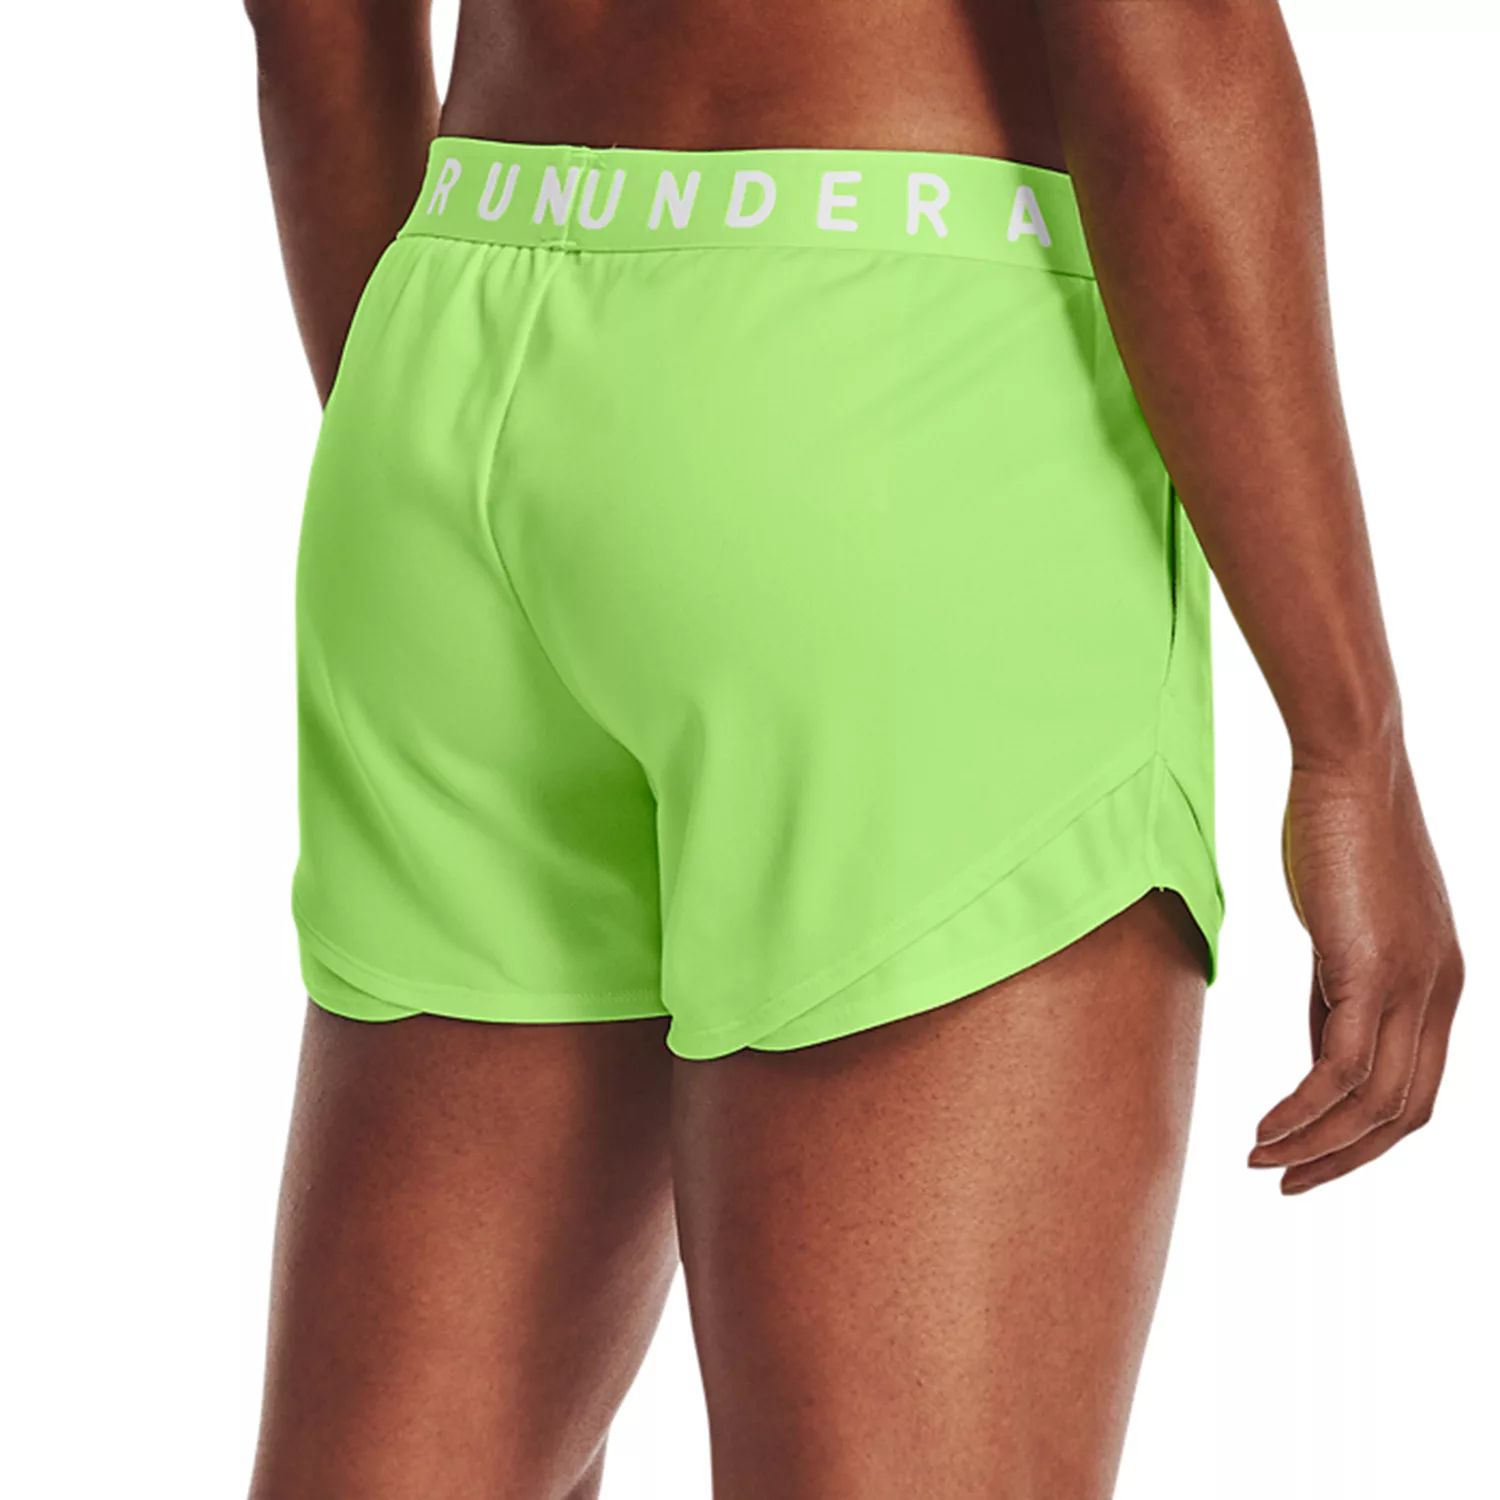 Женские шорты Under Armour Play Up 3.0 Under Armour шорты женские under armour play up 2 in 1 shorts размер 48 50 rus